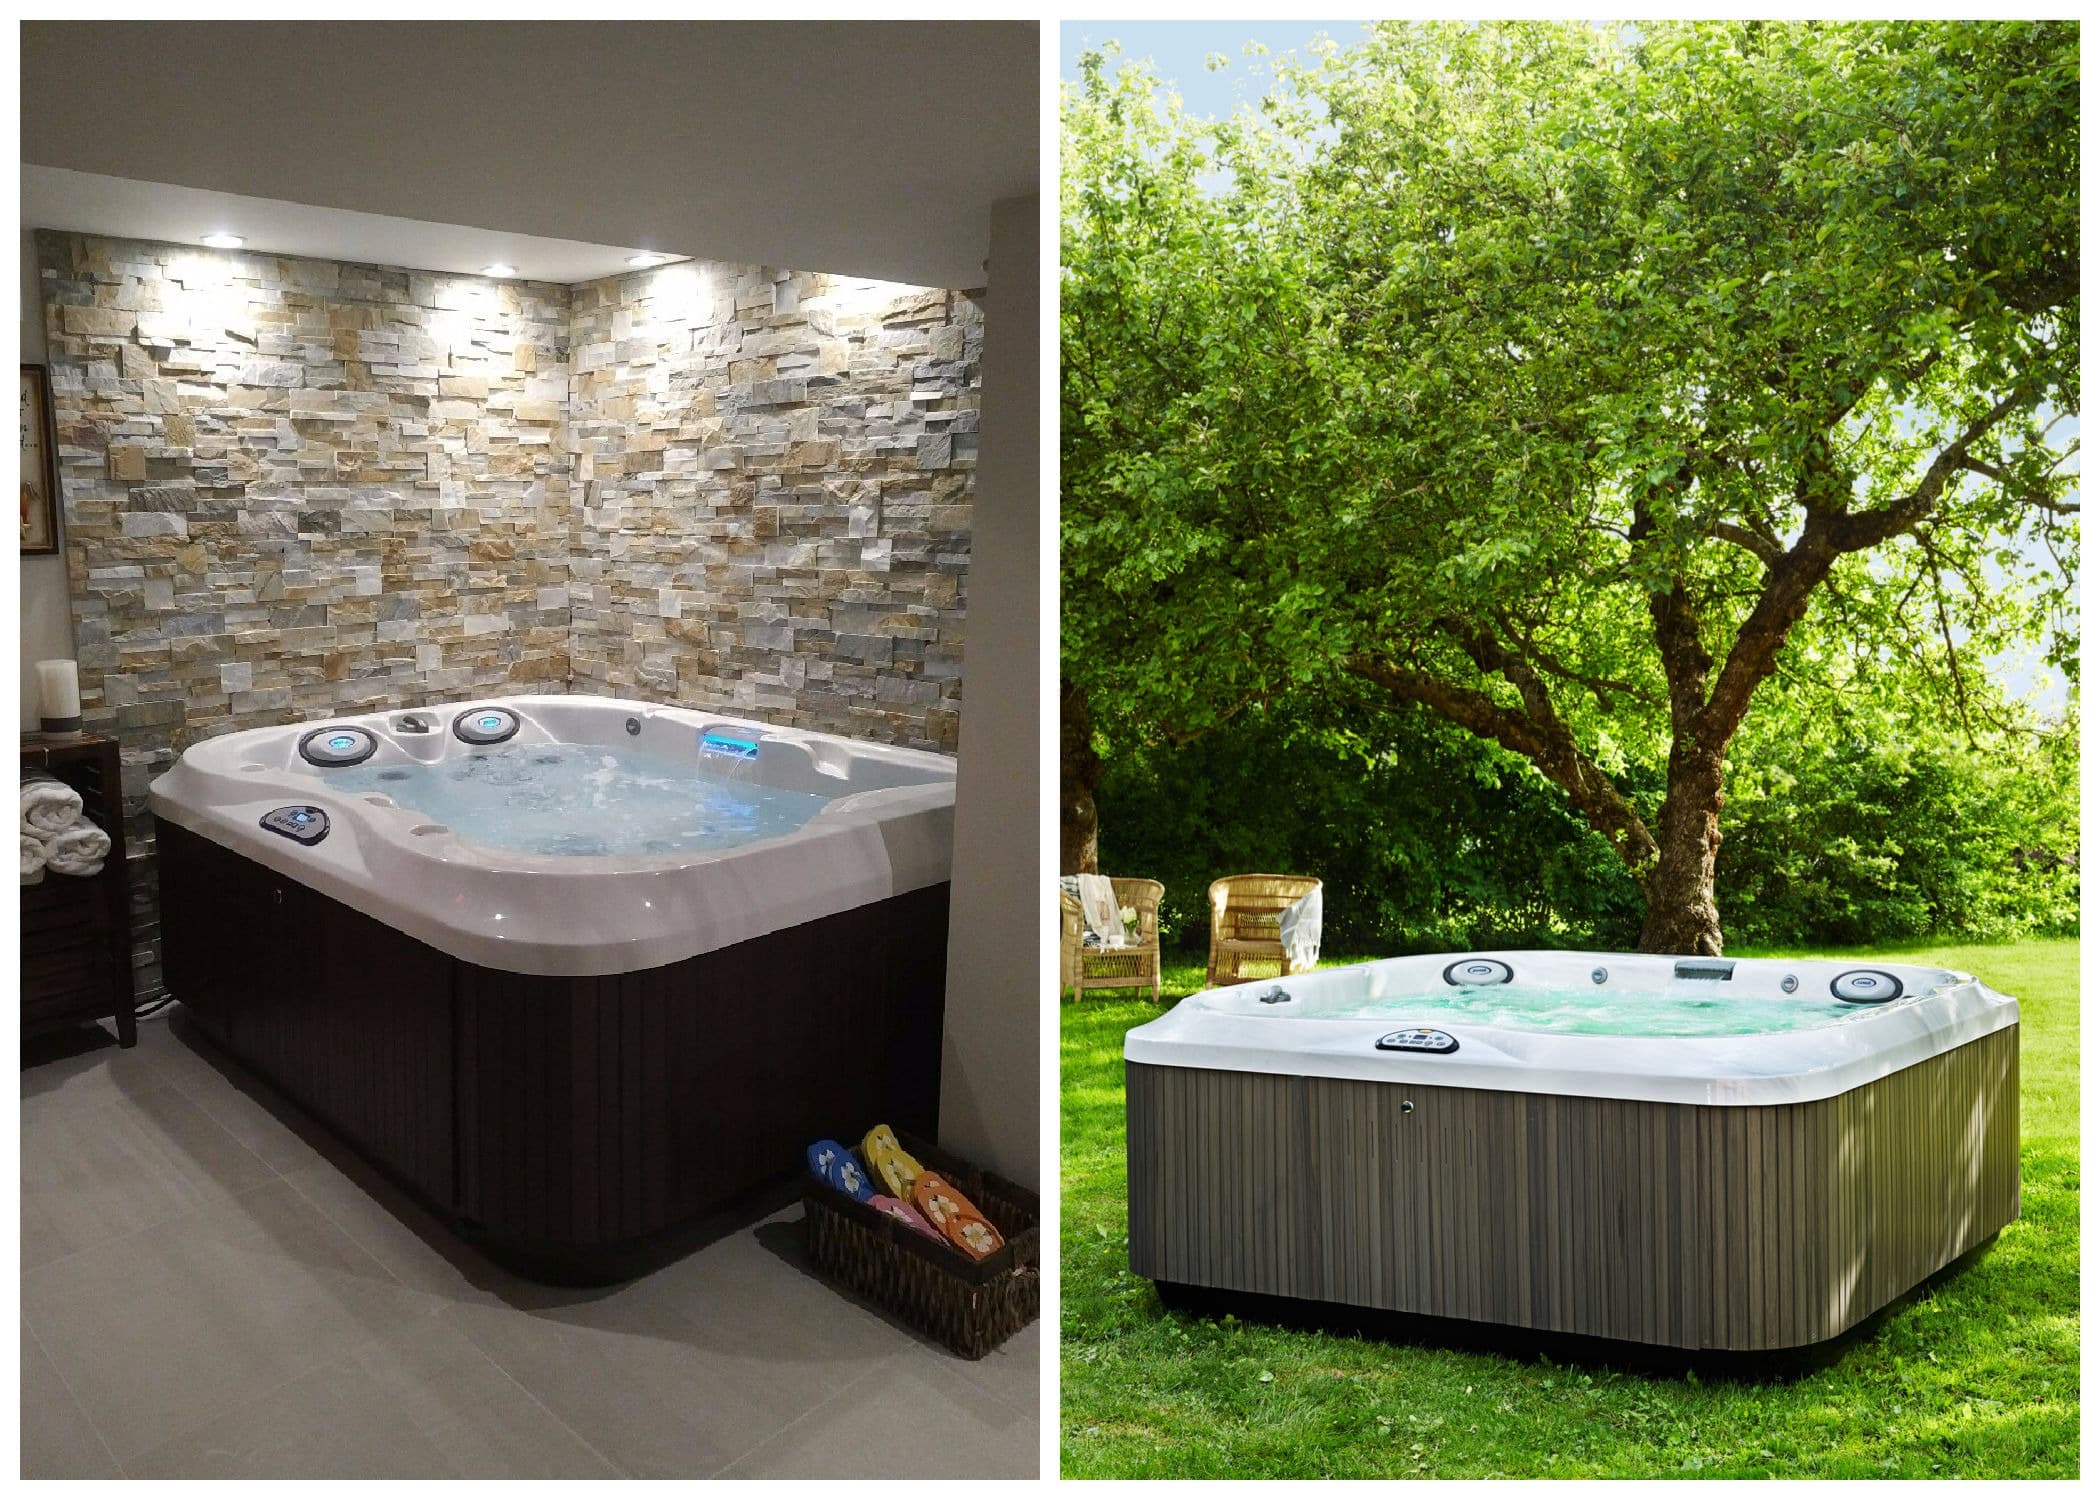 A Jacuzzi® hot tub on the left, placed indoor. A Jacuzzi® hot tub on the right, placed outdoors.